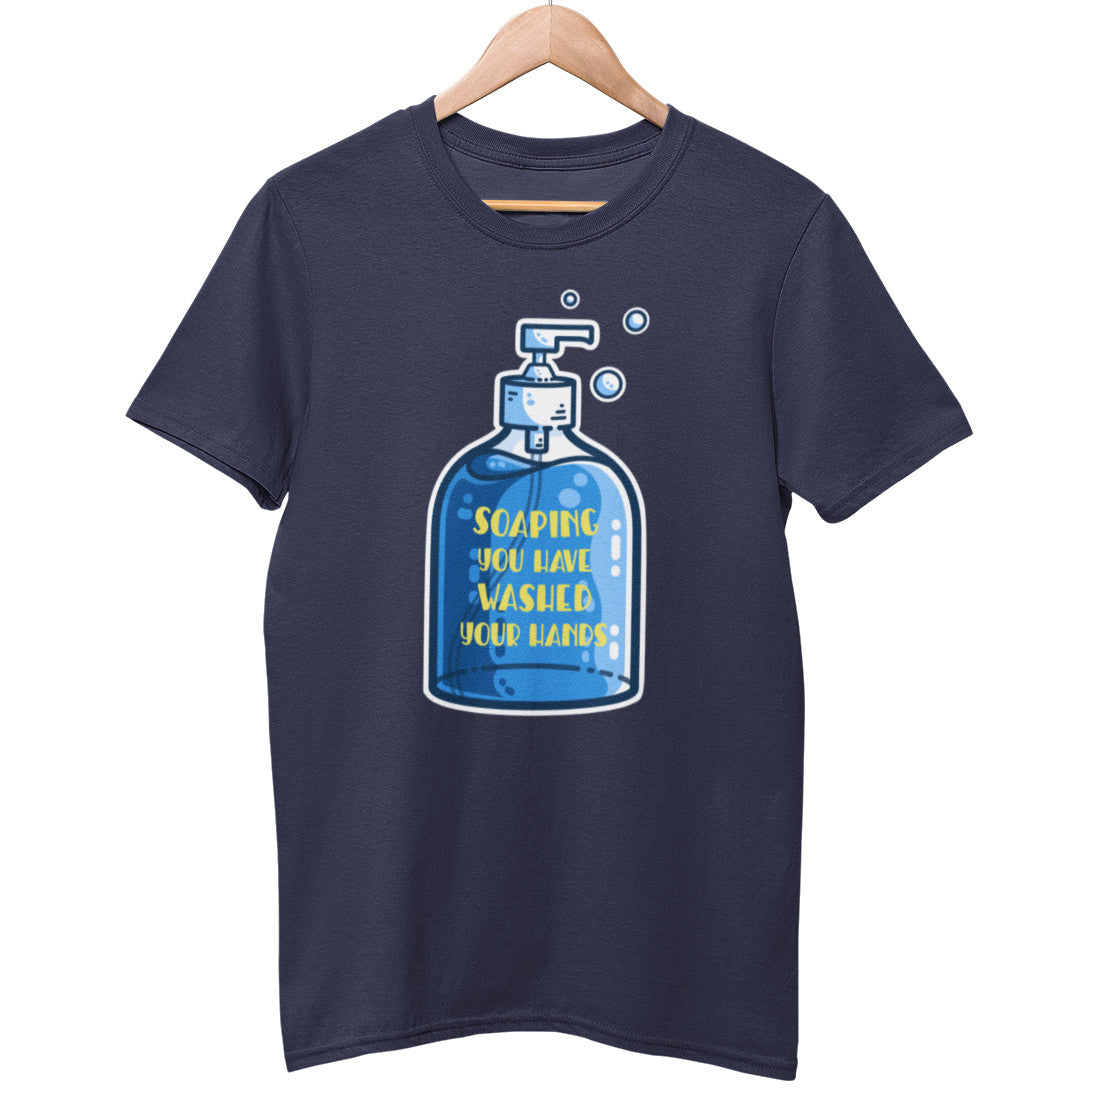 A navy t-shirt on a hanger, with a design on the front of a liquid soap dispenser bottle of blue liquid with the yellow words 'soaping you have washed your hands' on the bottle.